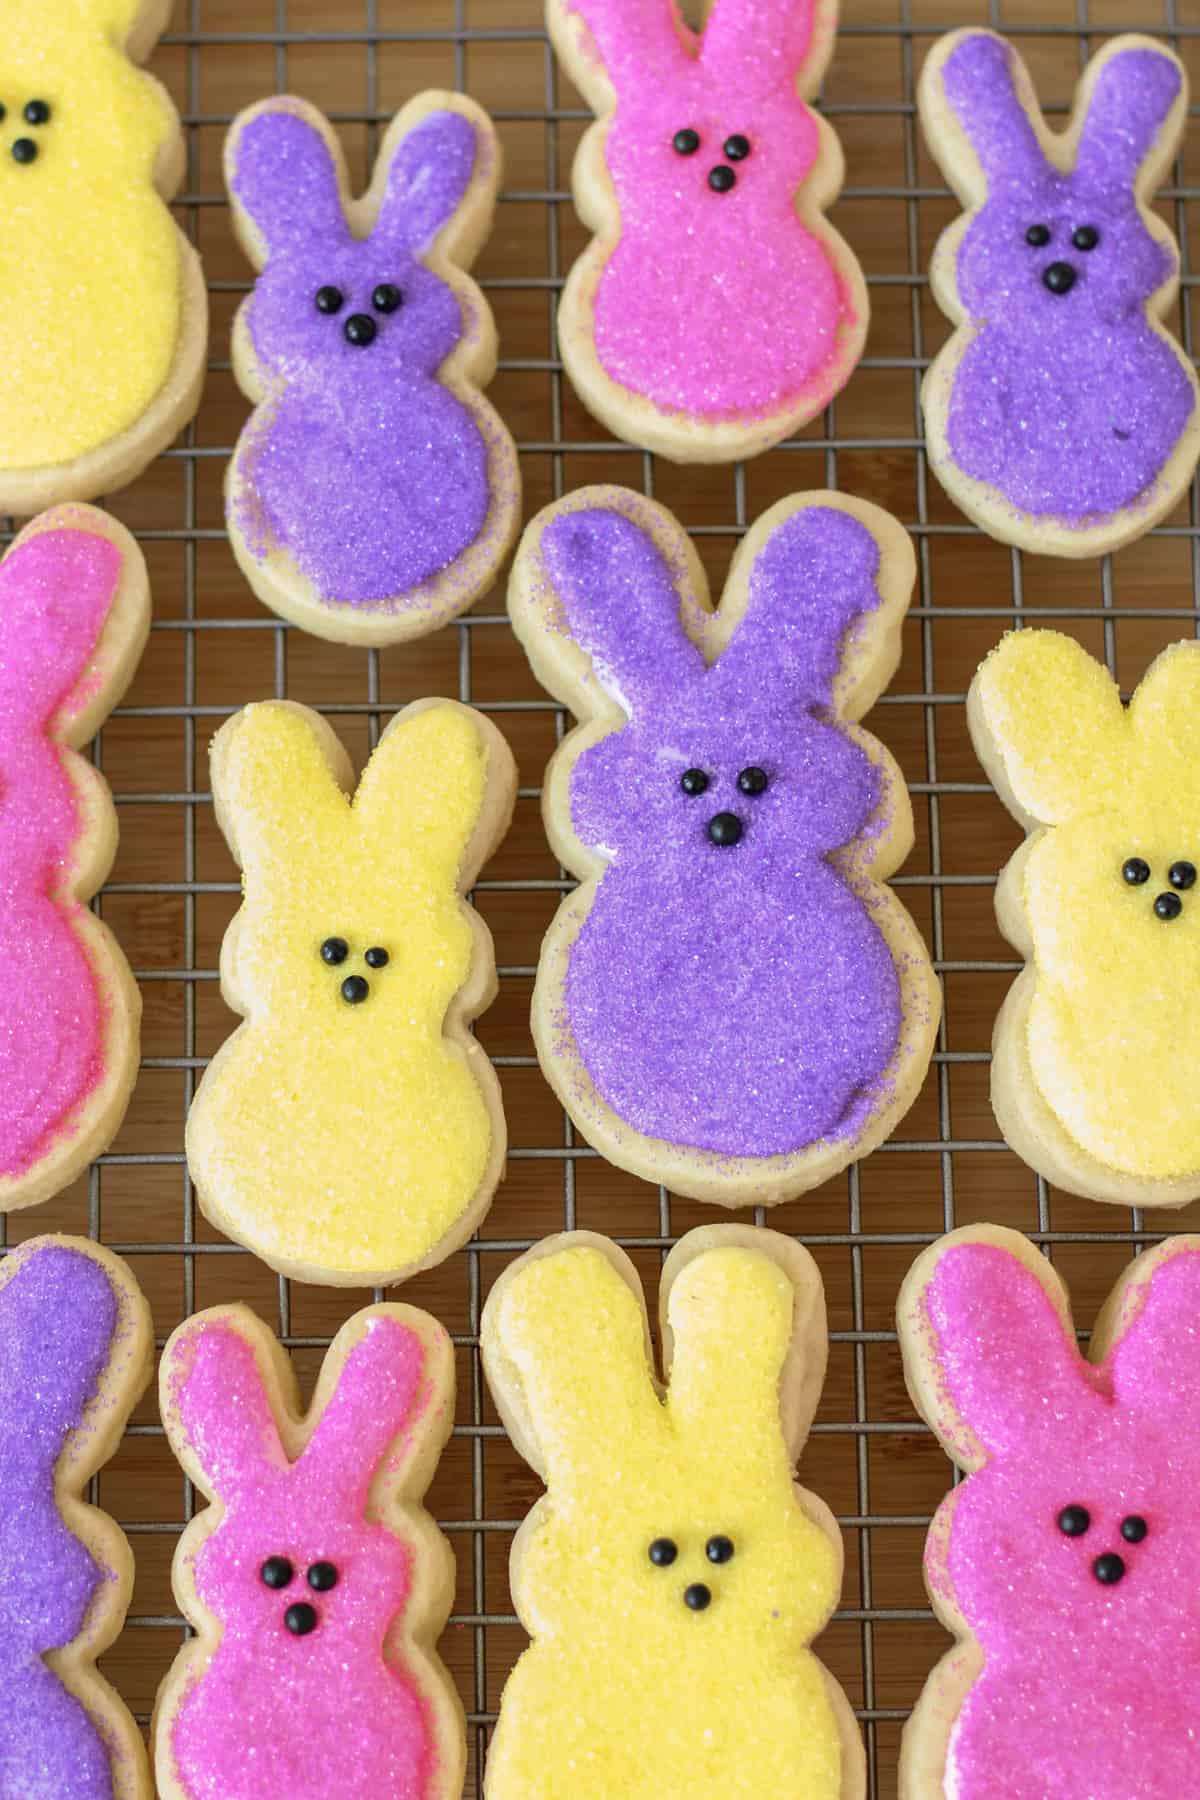 Yellow, purple, pink bunny peeps sugar cookies with sprinkles on a wire rack
